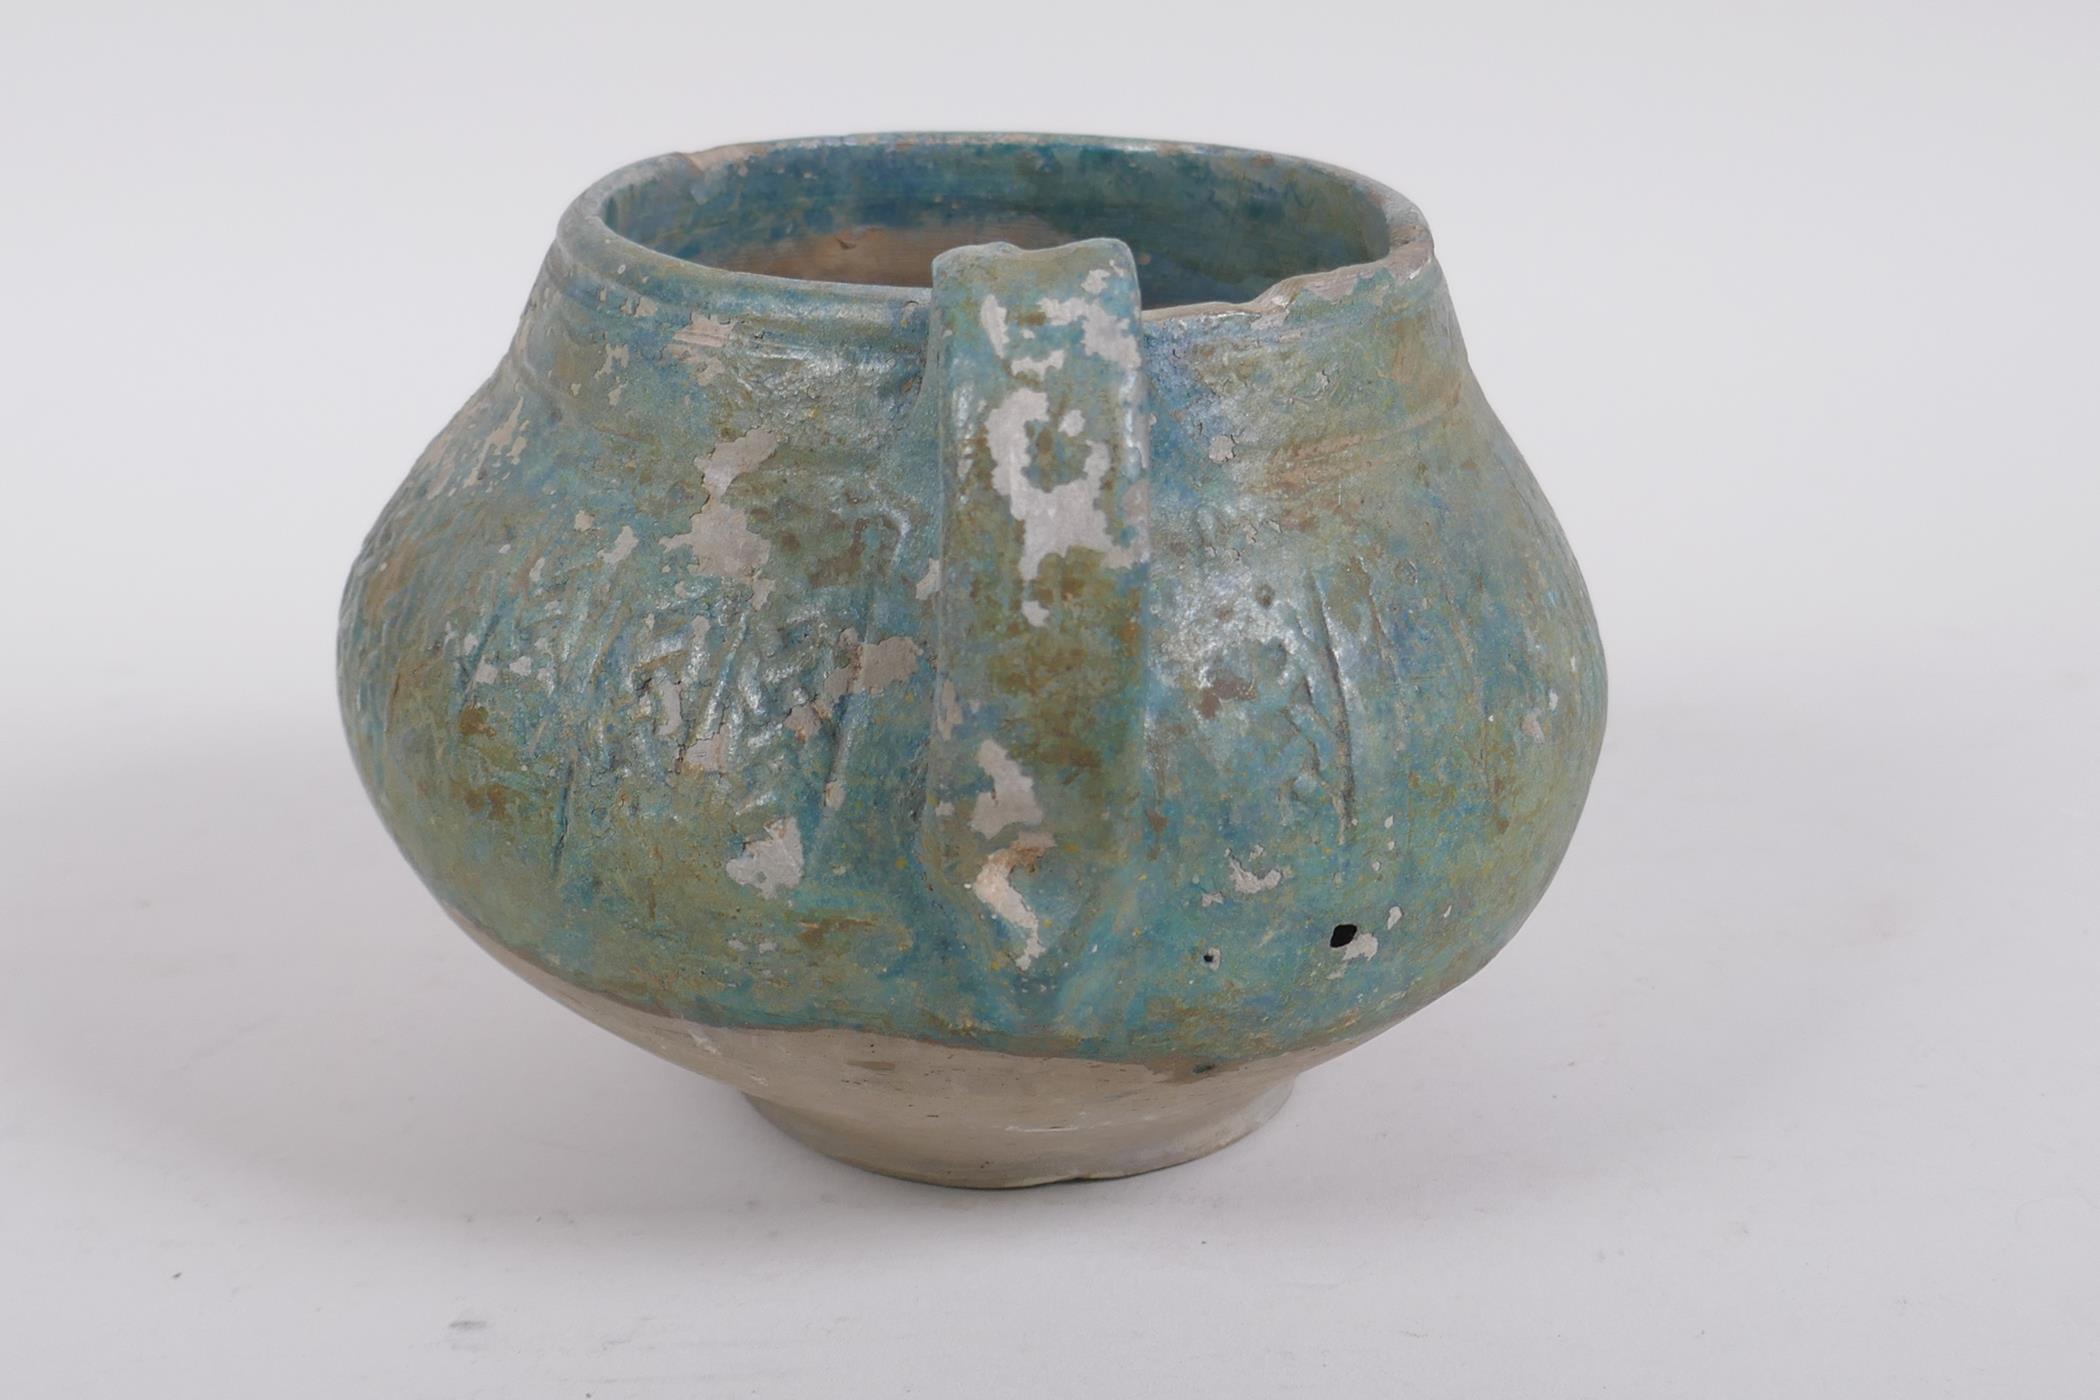 An antique turquoise slip glazed terracotta pot with a single handle, historic repairs, 14cm - Image 4 of 7